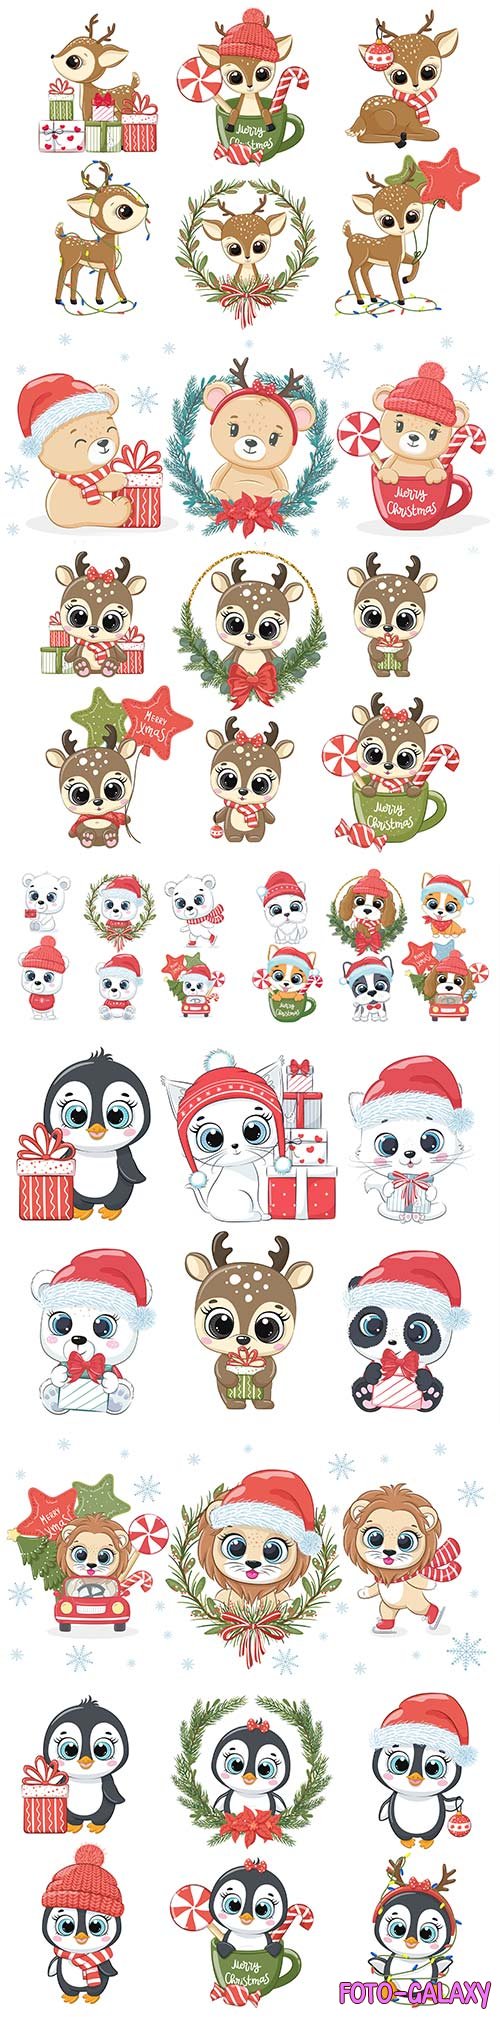 Cute vector animals for the new year and christmas